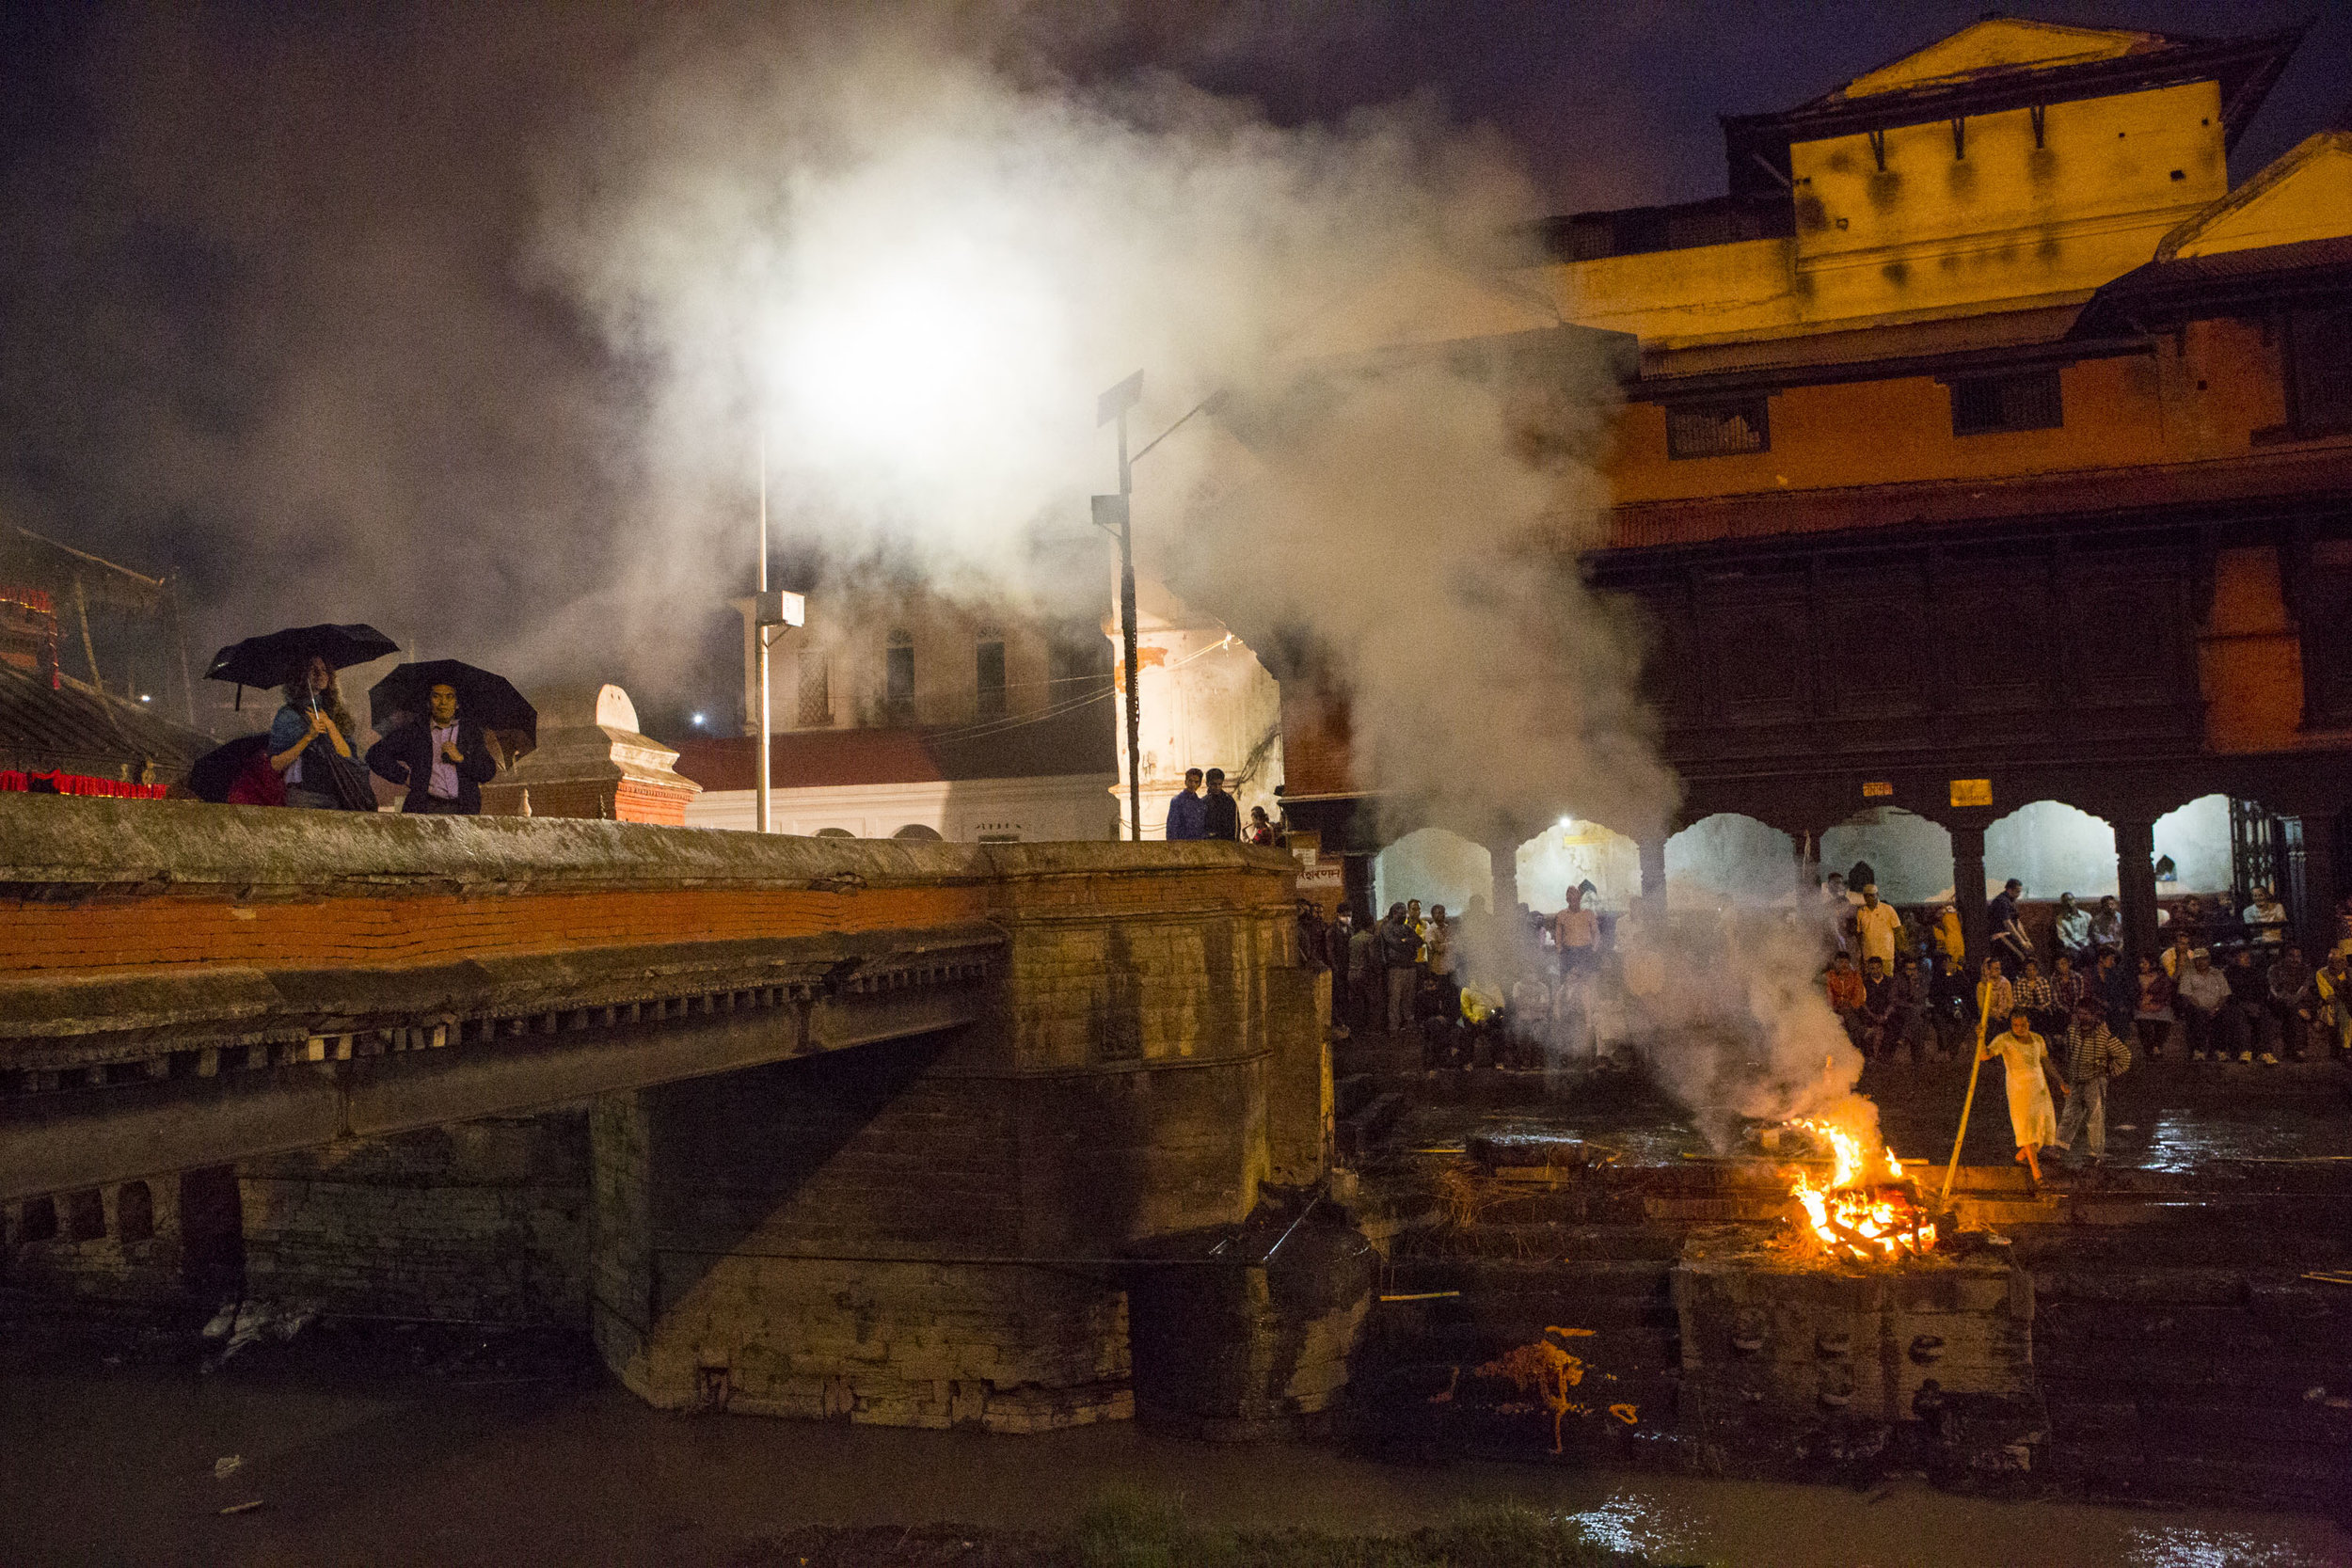  Smoke billows from the ghat where the traditional cremations are performed. Cremations continue through the night until the ashes are released into the Bagmati River where the spirit will flow into reincarnation. 